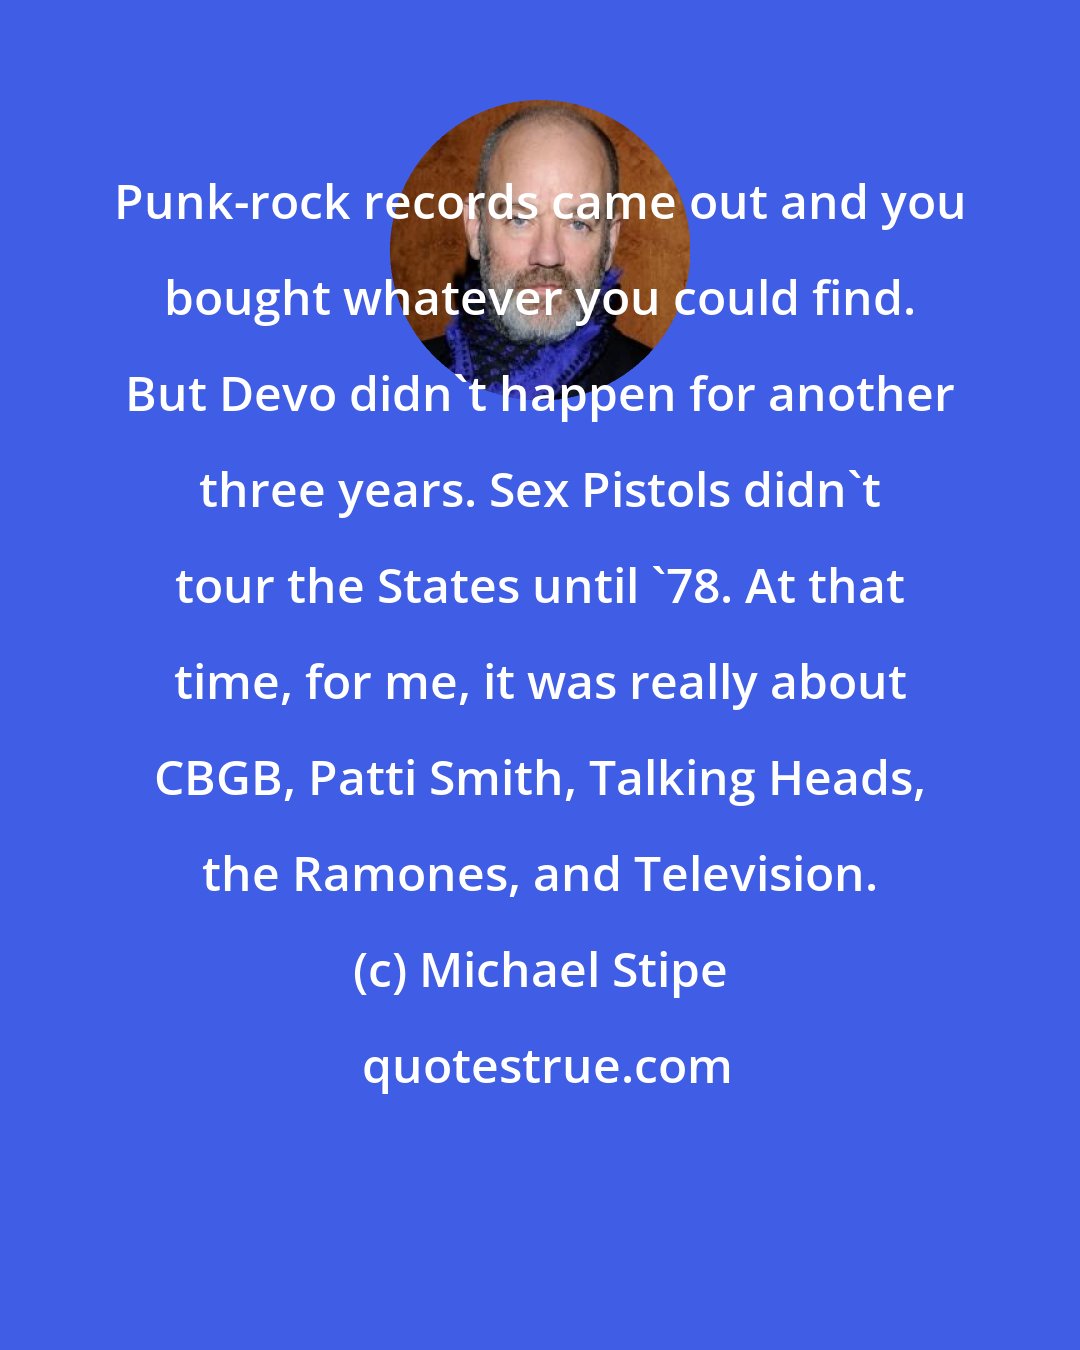 Michael Stipe: Punk-rock records came out and you bought whatever you could find. But Devo didn't happen for another three years. Sex Pistols didn't tour the States until '78. At that time, for me, it was really about CBGB, Patti Smith, Talking Heads, the Ramones, and Television.